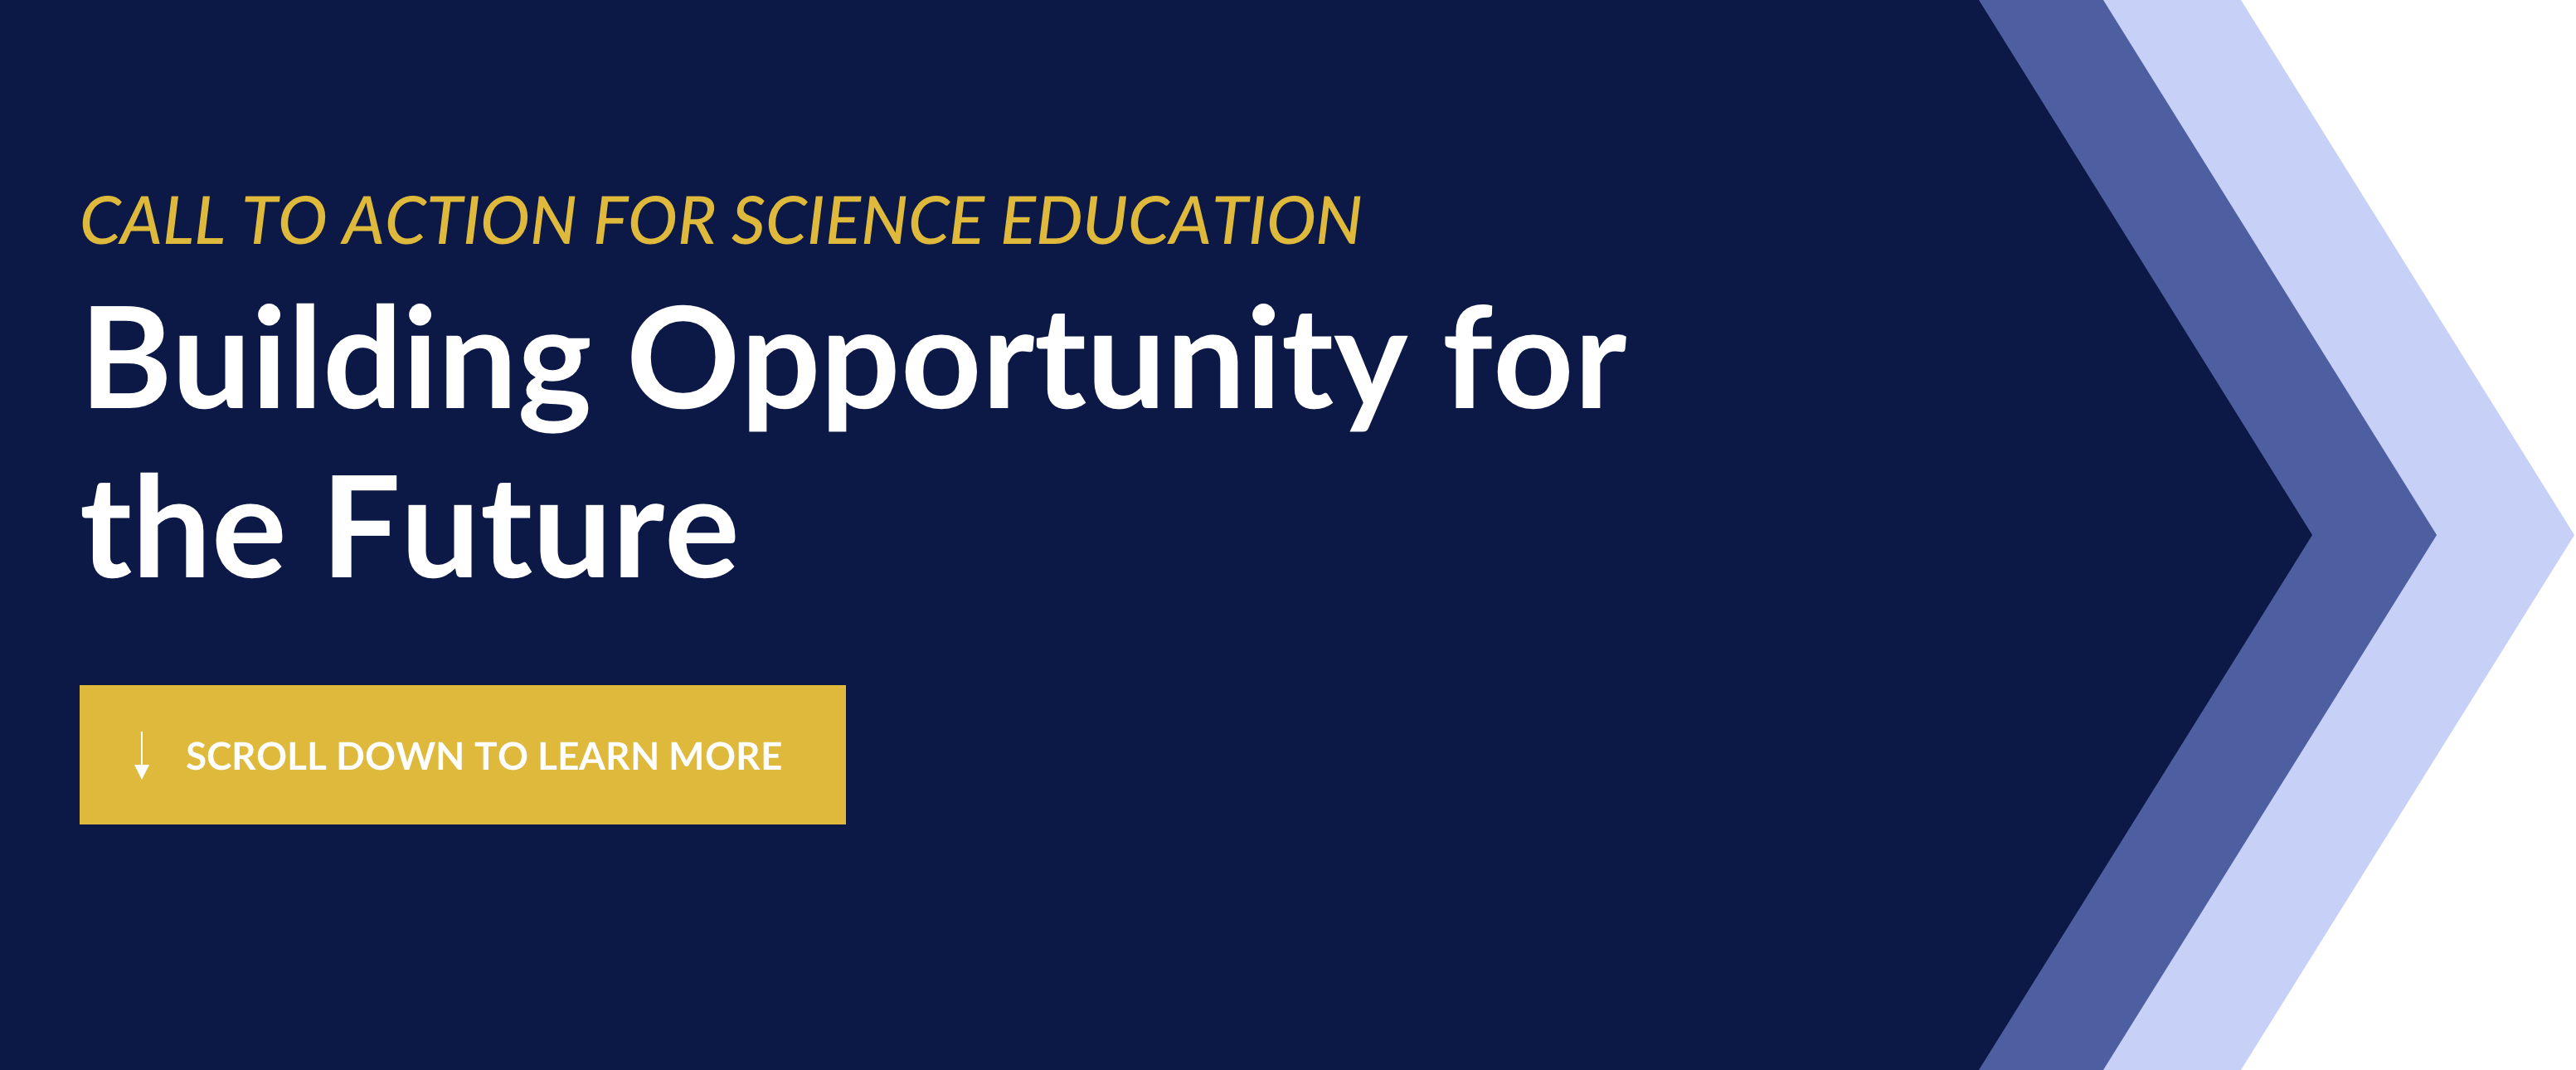 Title: Call to Action for Science Education Building Opportunity for the Future